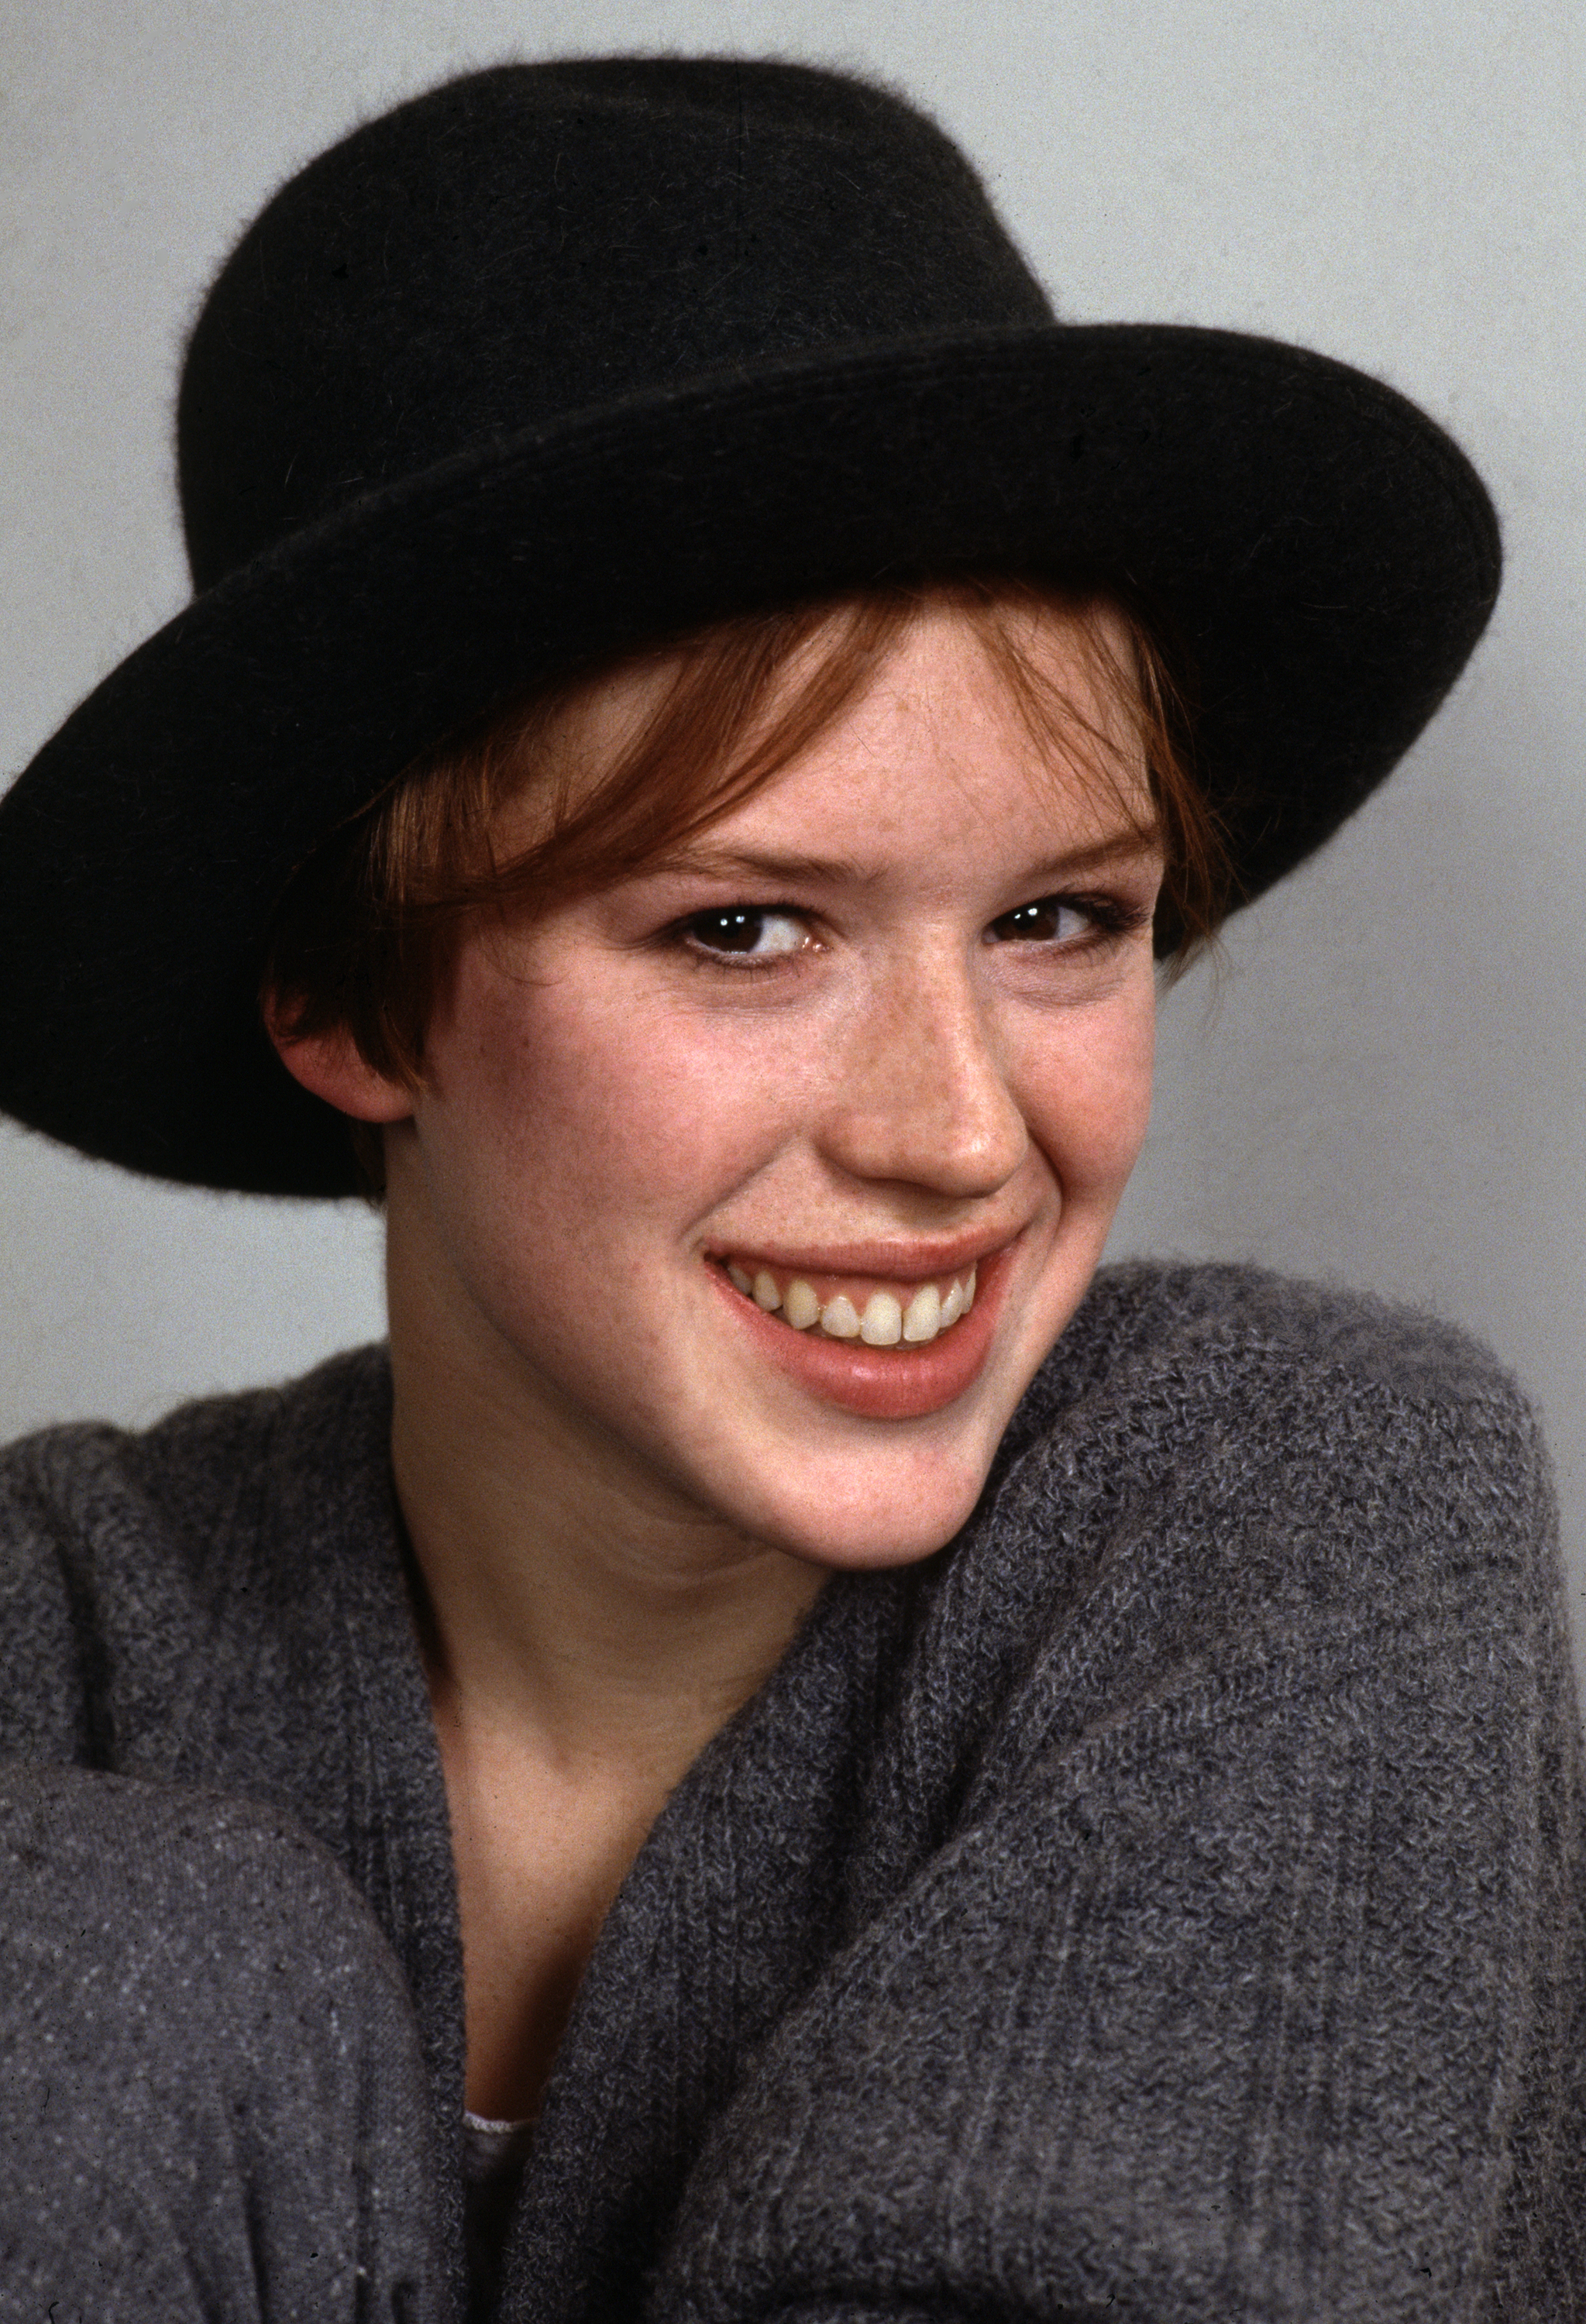 Molly Ringwald posing for a portrait in Los Angeles, California on January 30, 1985 | Source: Getty Images